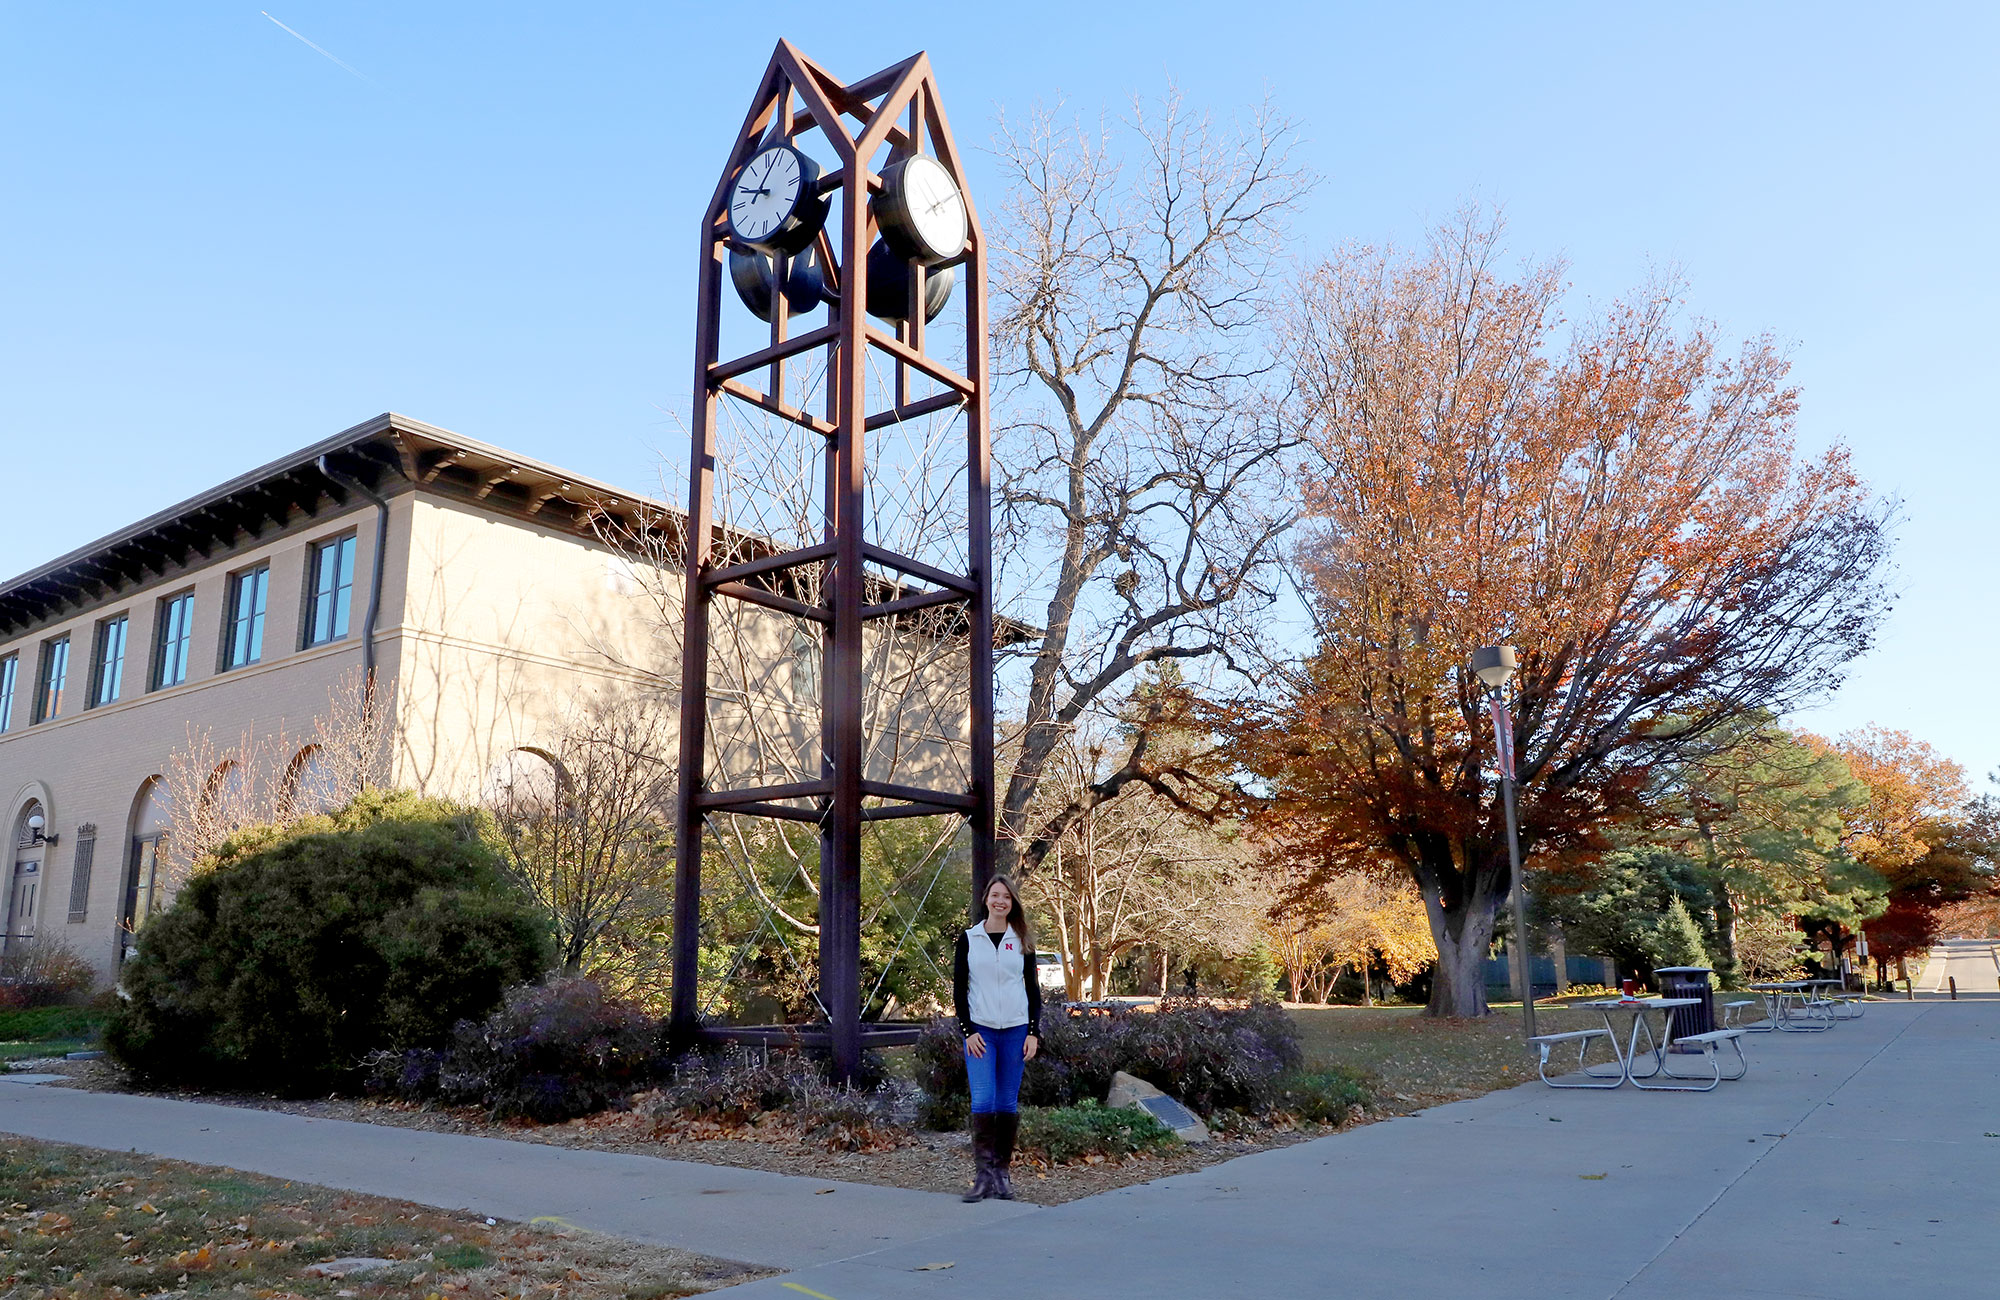 Fernanda Krupek, a 2021 fellowship recipient, stands next to the East Campus clock tower donated by the Heuermanns. Krupek is studying cropping systems and soil health management in Agronomy and Horticulture.